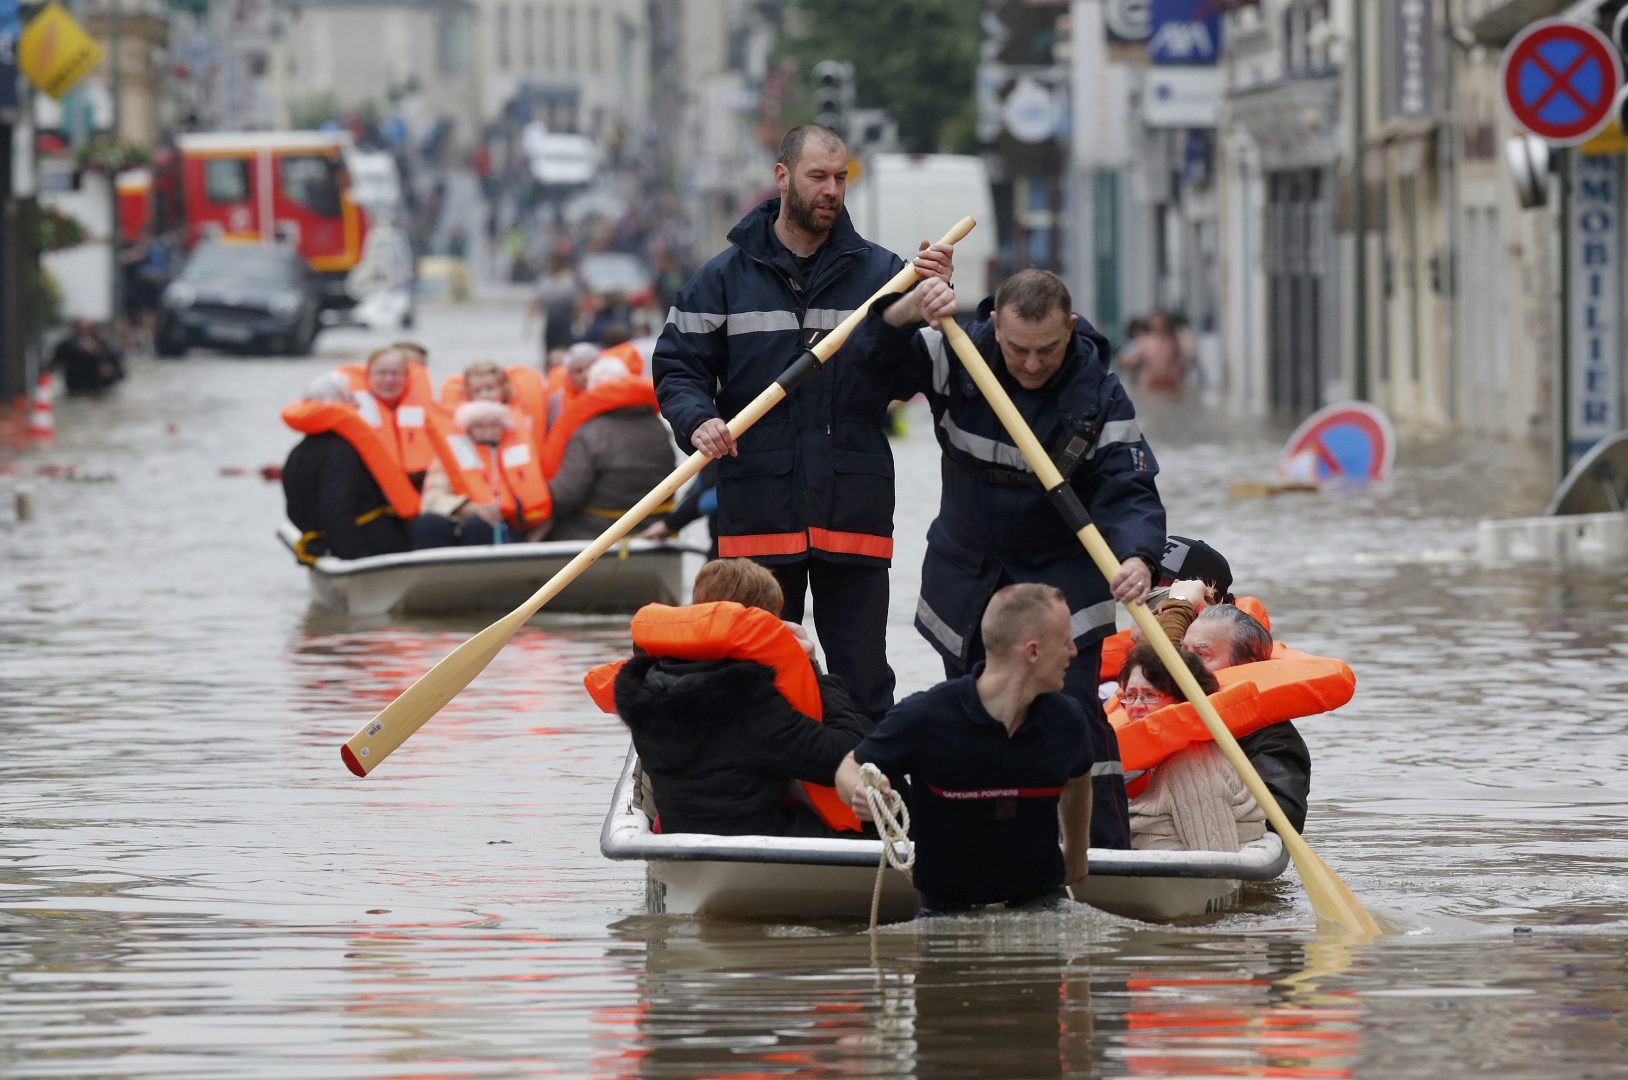 French firefighters on small boats evacuate residents from a flooded area after heavy rainfall in Nemours, southern Paris, June 1, 2016. REUTERS/Christian Hartmann